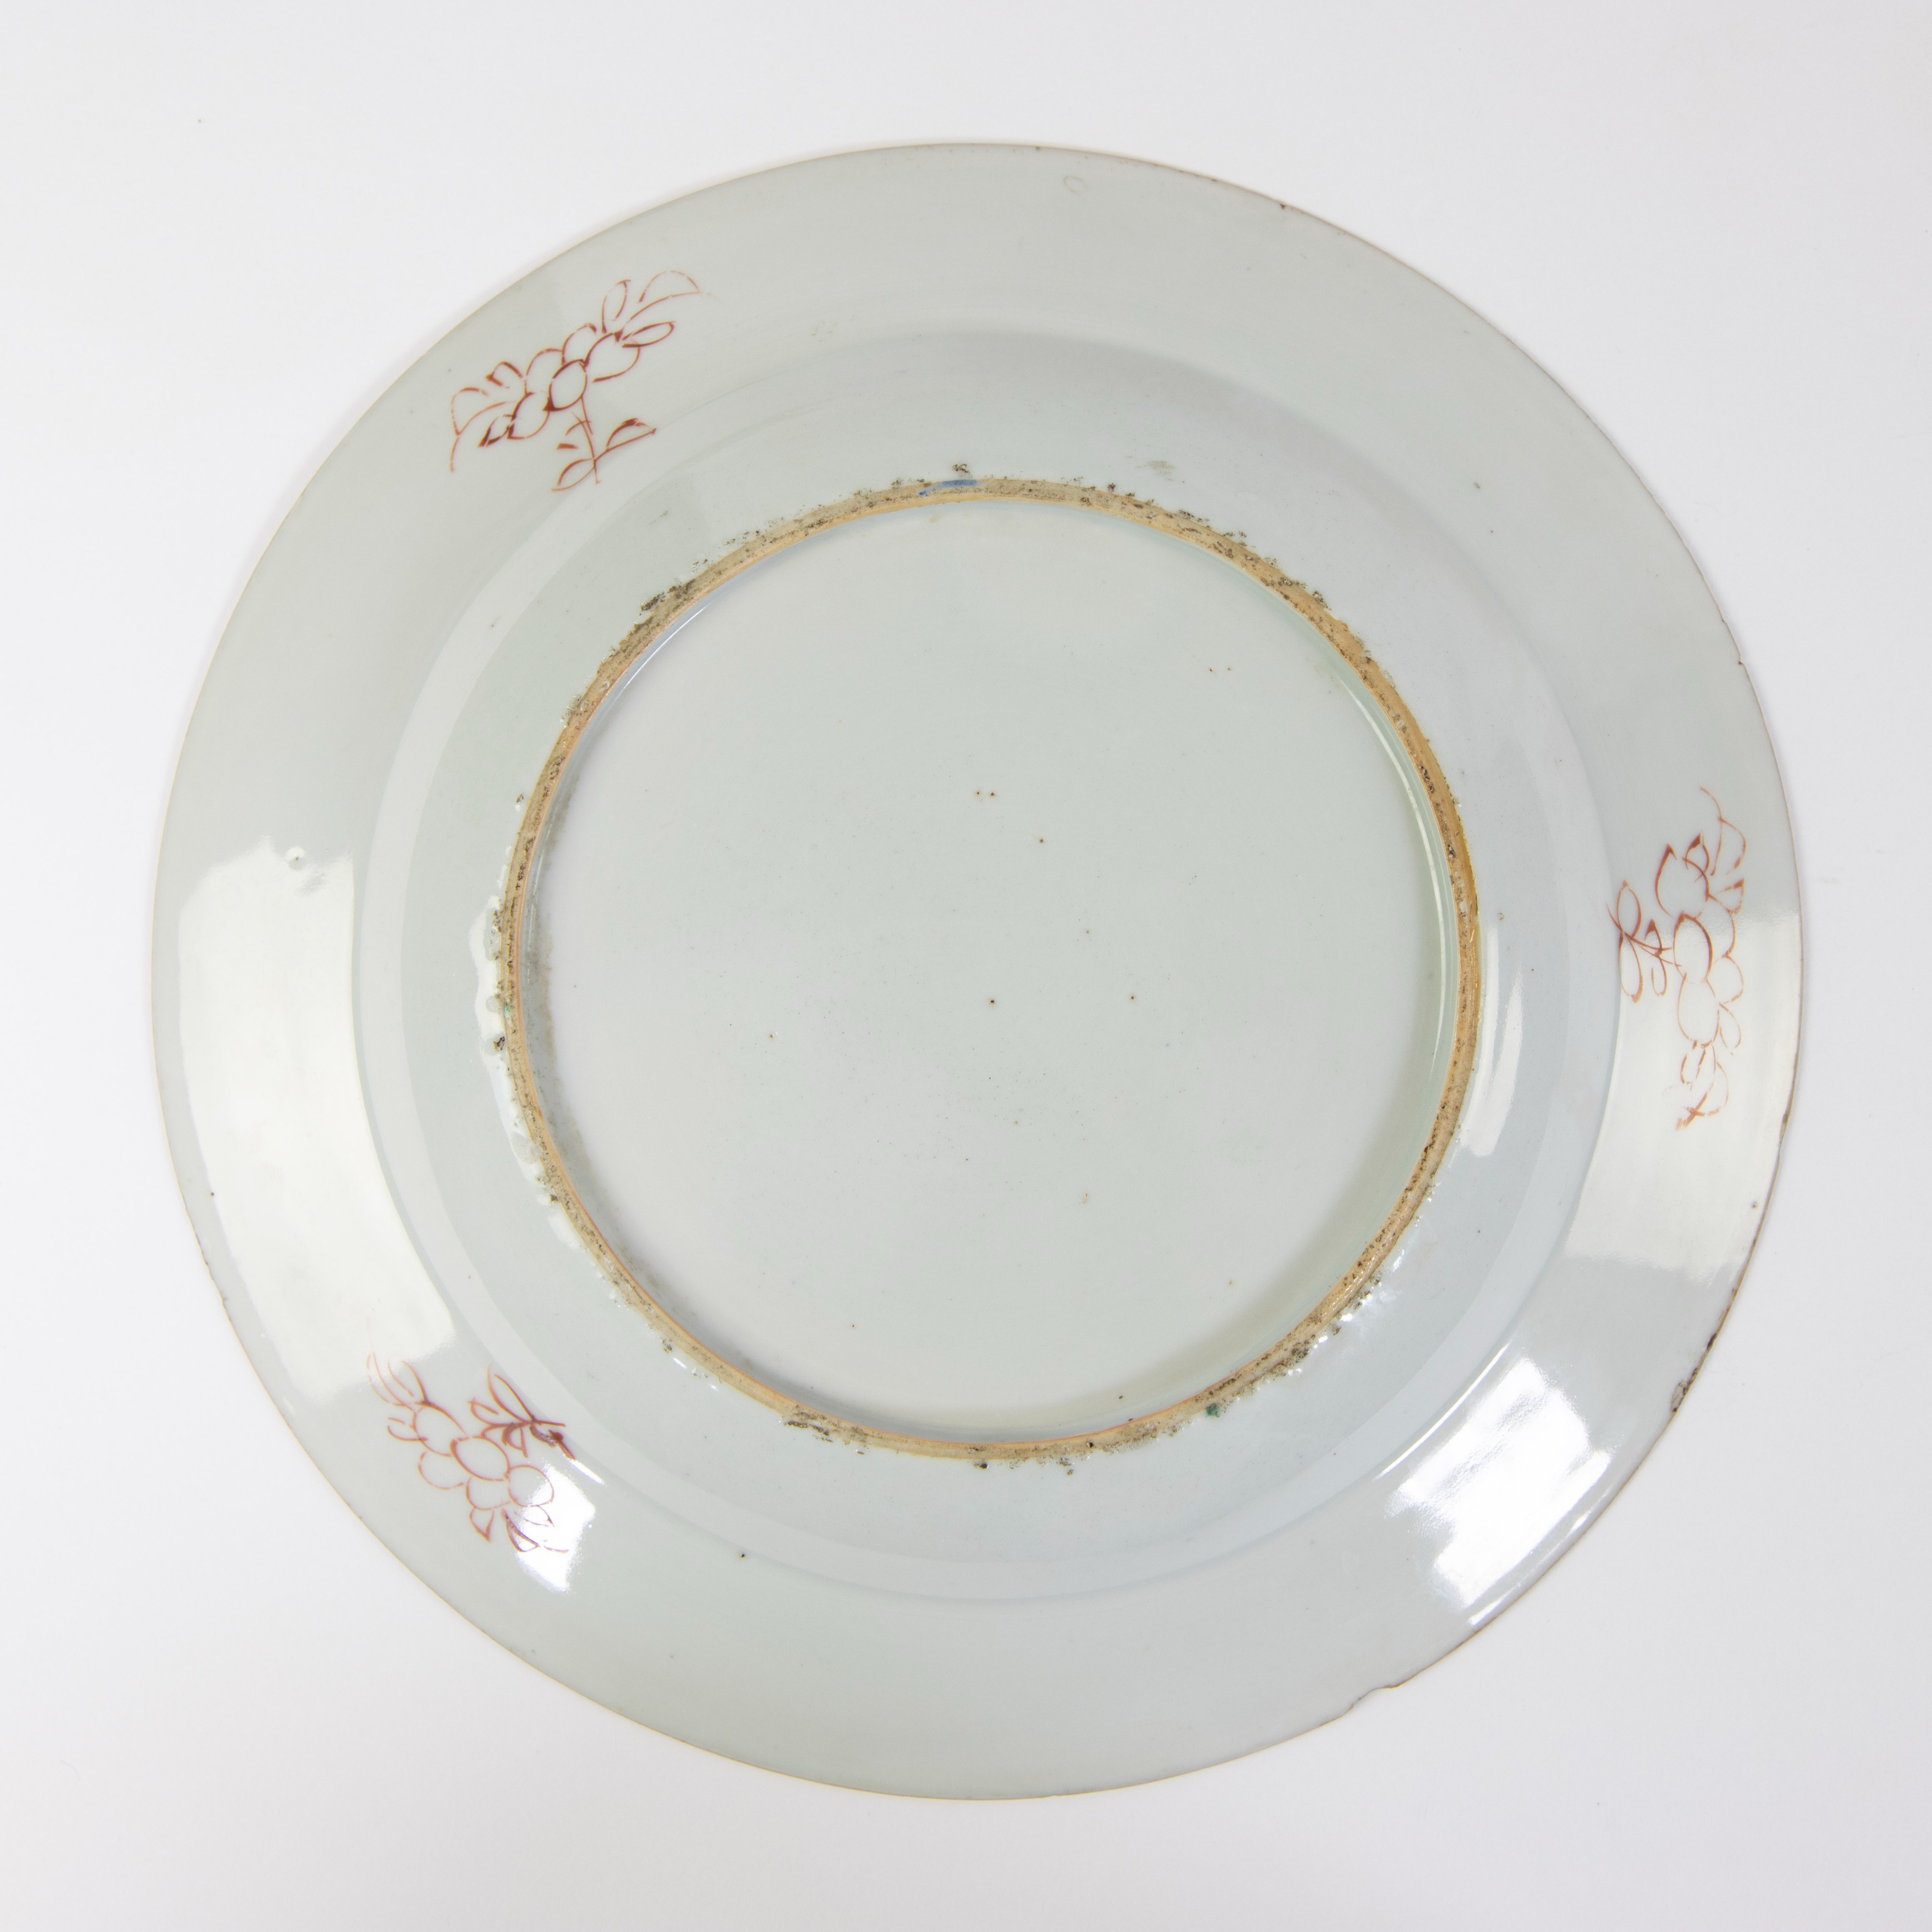 Lot of 5 Chinese famille rose plates, 18th century - Image 8 of 18